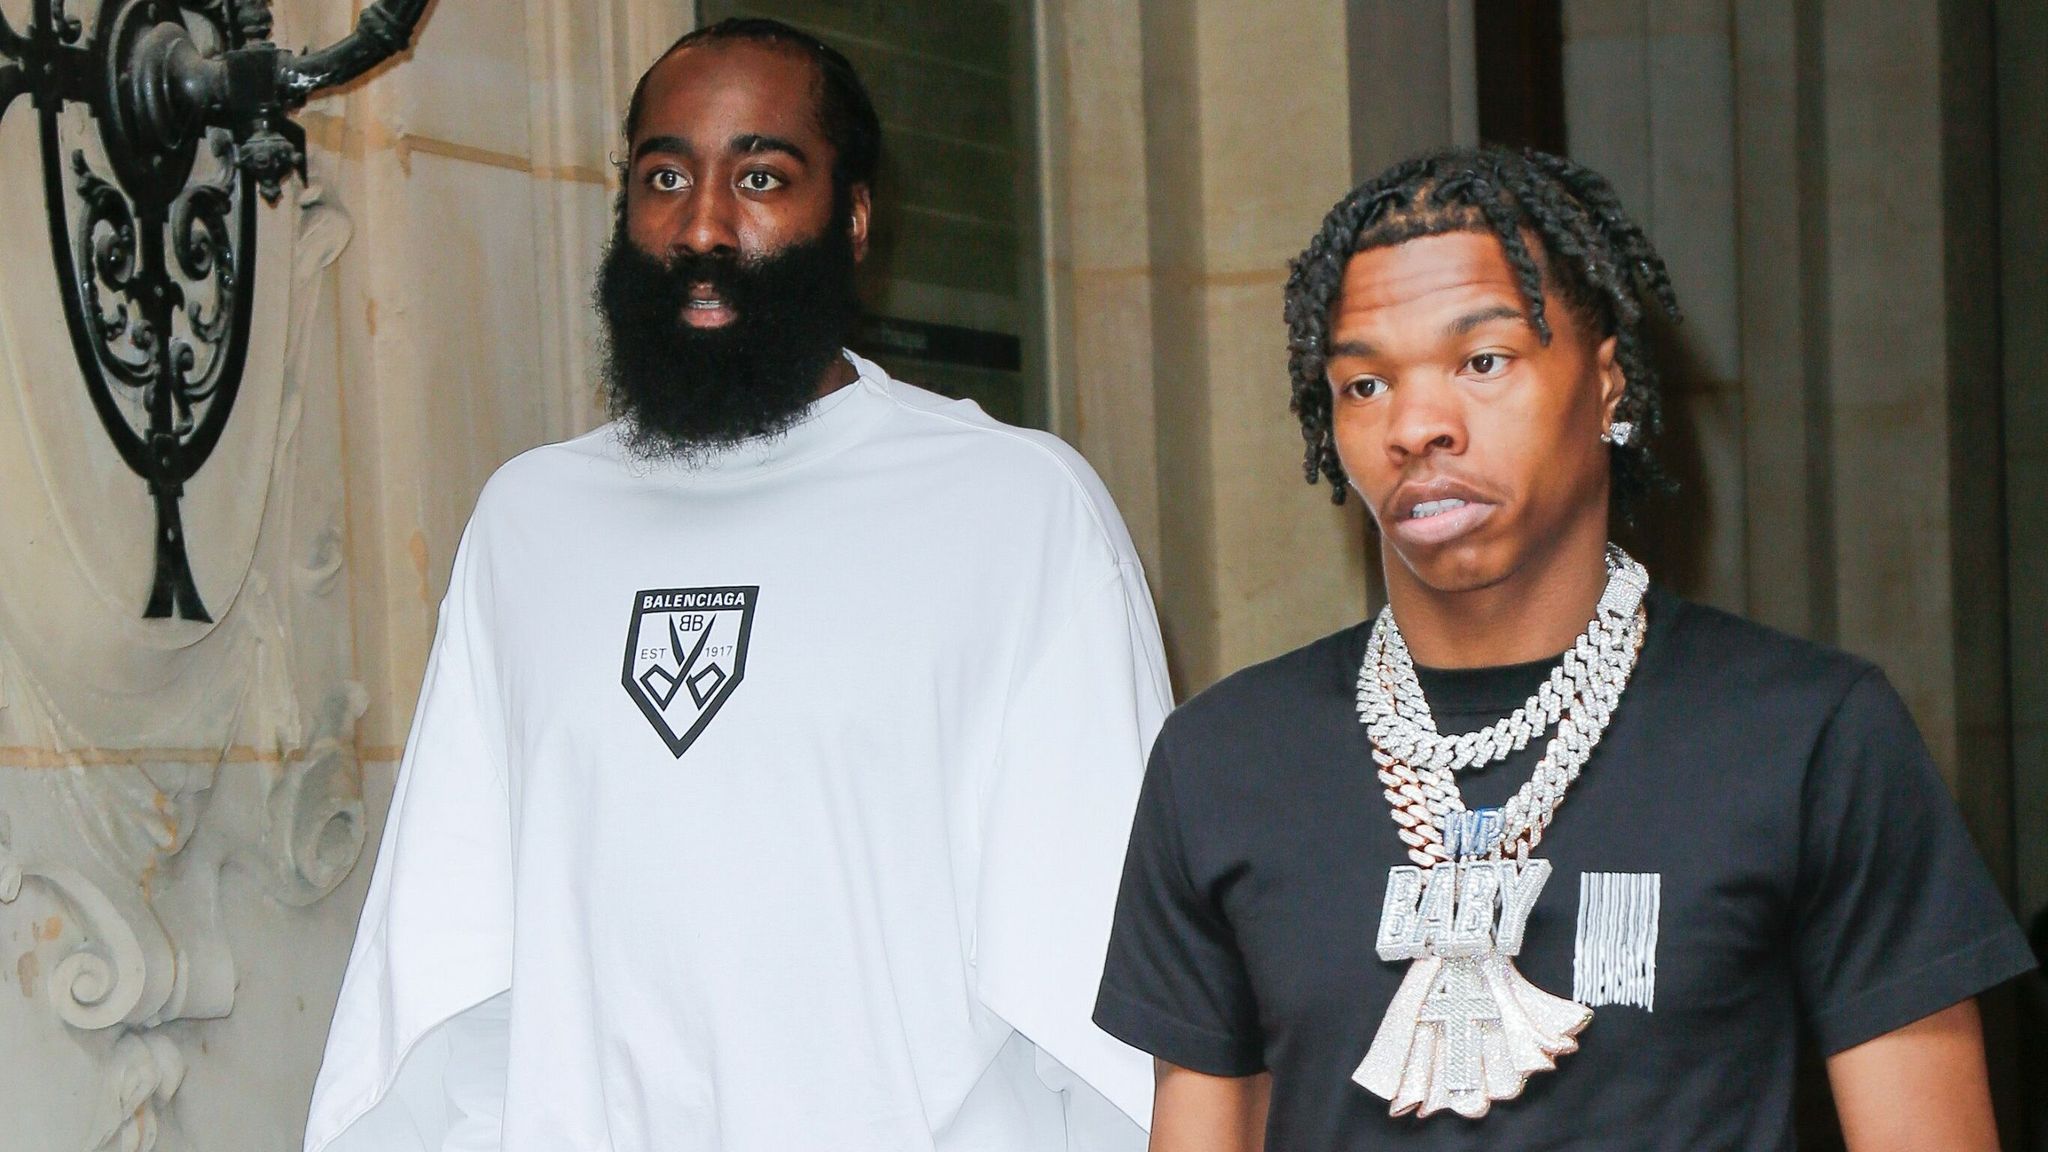 James Harden and Lil Baby detained by police in Paris